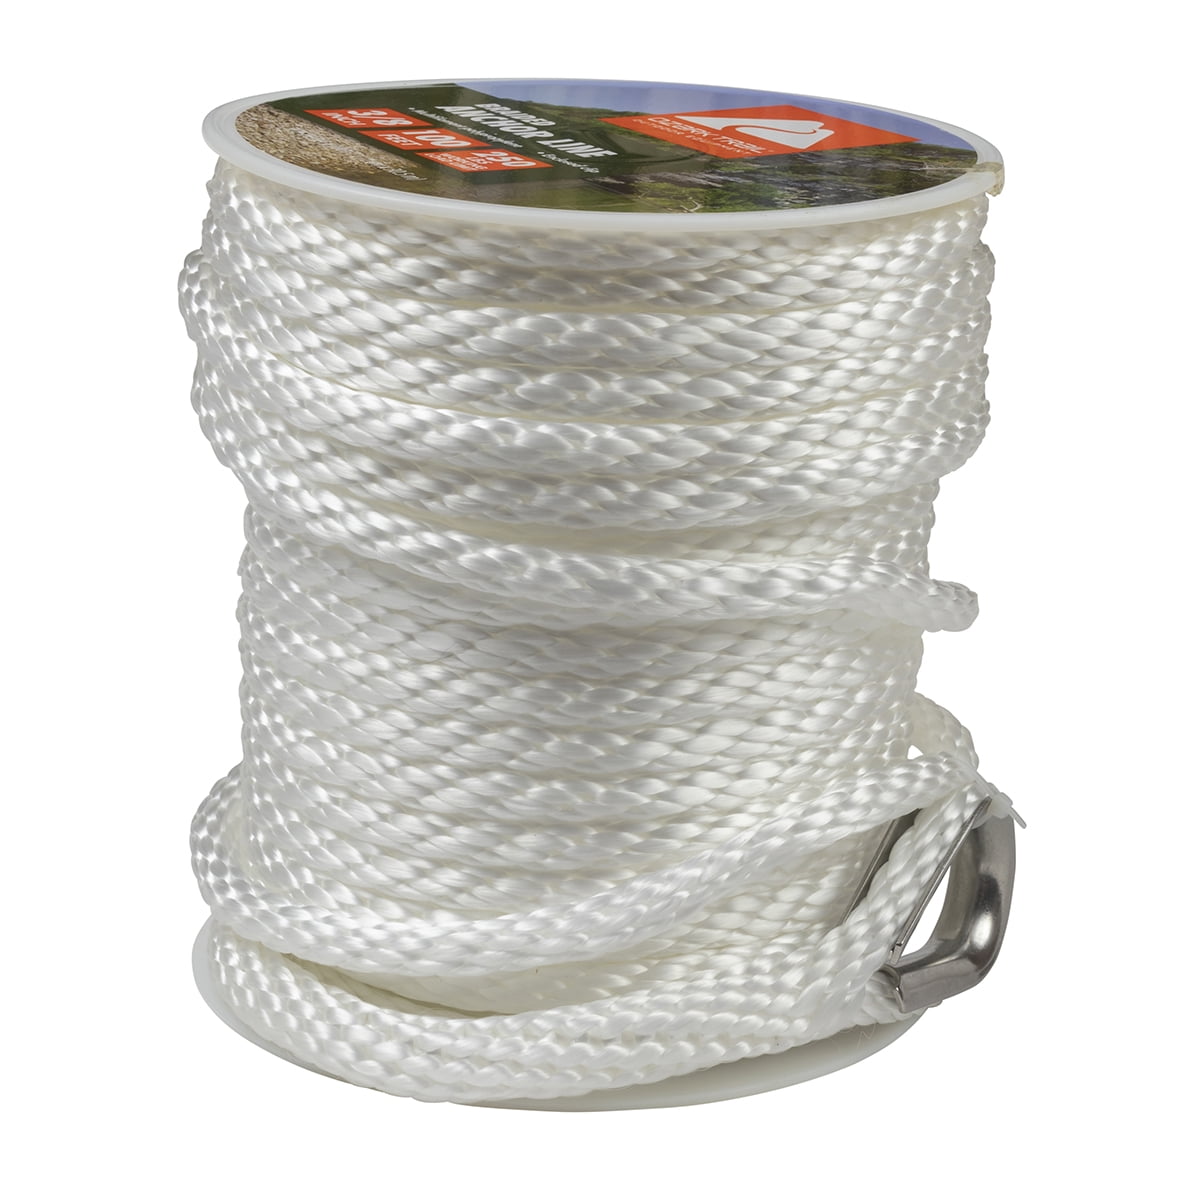 Braided Polyester rope 1/4"x100 feet  small boat anchor line 